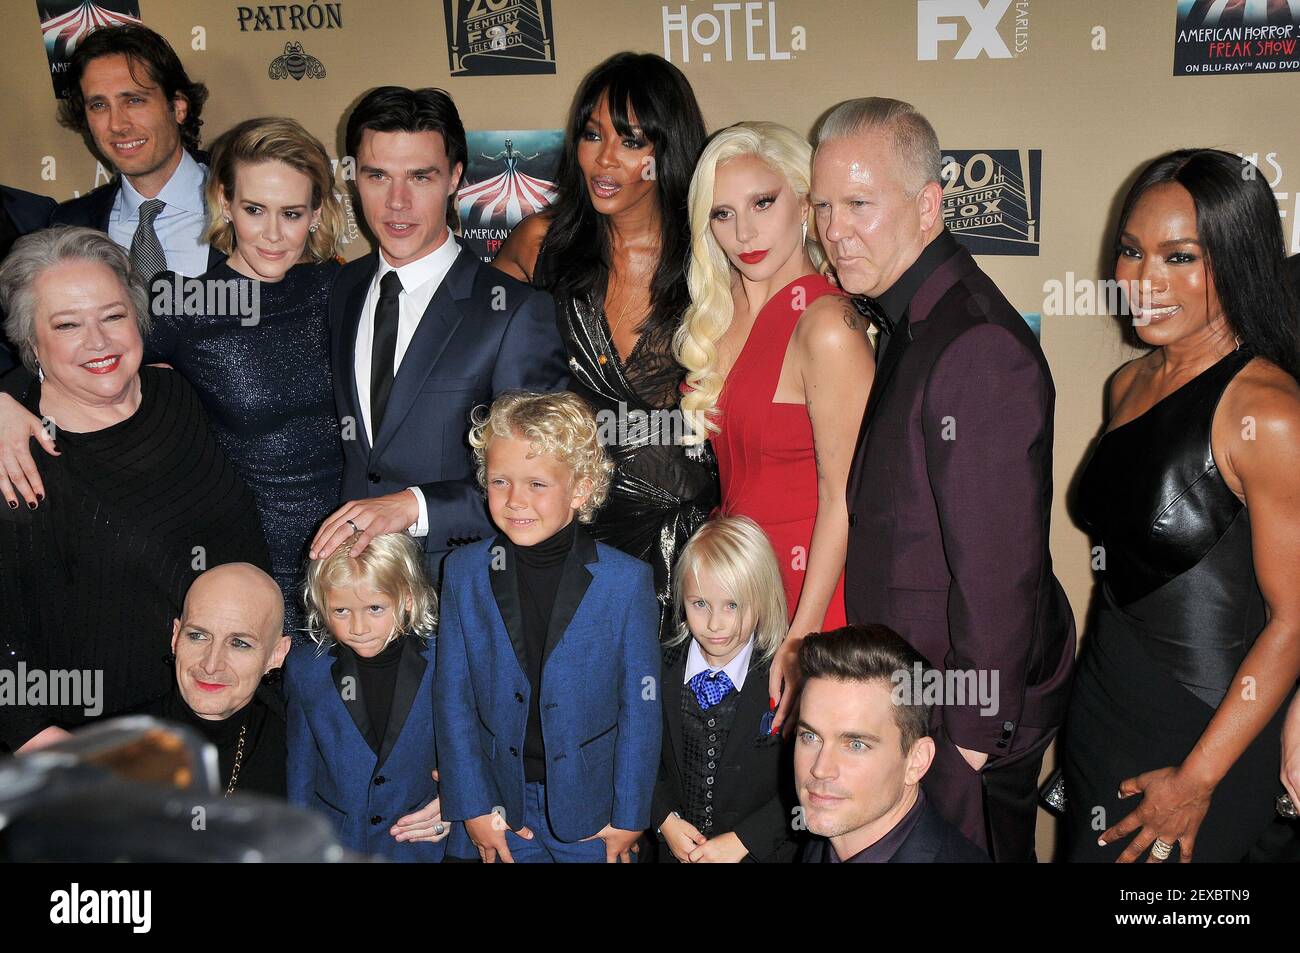 American Horror Story: Hotel" Cast & Crew at the "American Horror Story:  Hotel" Los Angeles Premiere held at the Premiere House at Regal Cinemas  L.A. LIVE in Los Angeles, CA on Saturday,